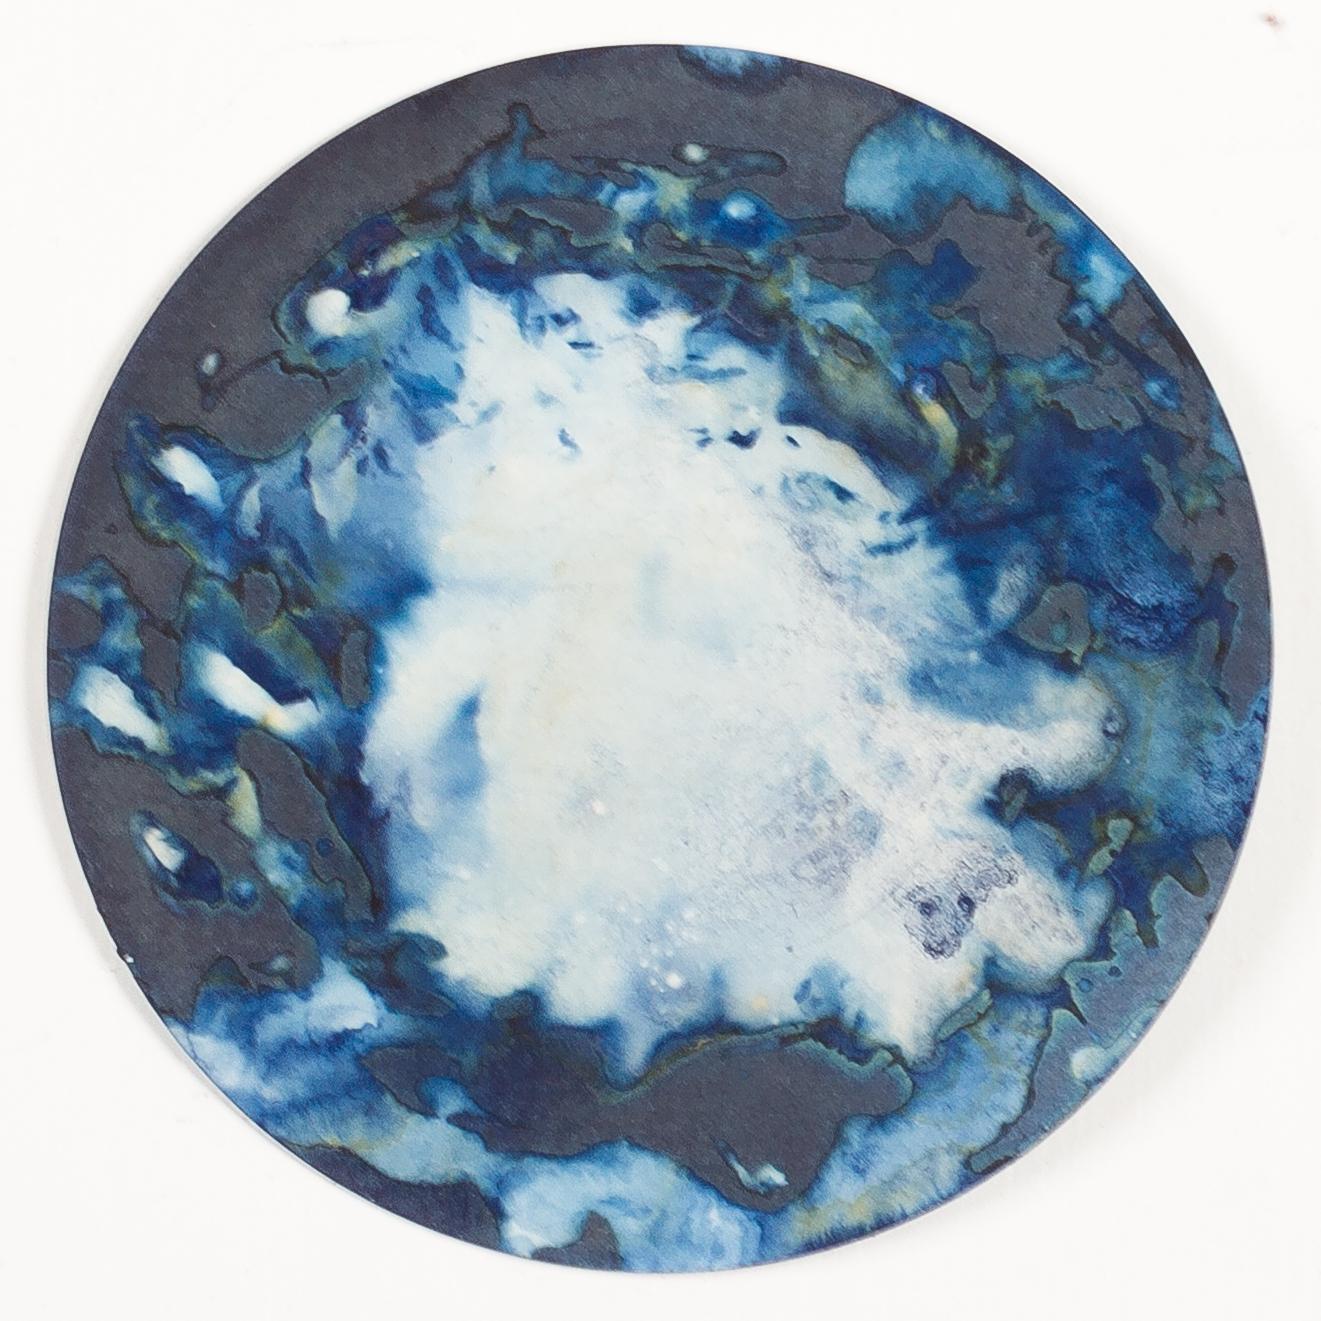 Algas 23, 63 y 64, 2022 by Paola Davila 
From the series Mareas
Cyanotype on 300 gr cotton paper
Mounted in a high-resistance borosilicate glass petri dish
Overall size: 36 cm Dm x 12 cm H x 2.4 cm Deep.
Individual Image size: 10.5 cm D. 
Each Petri